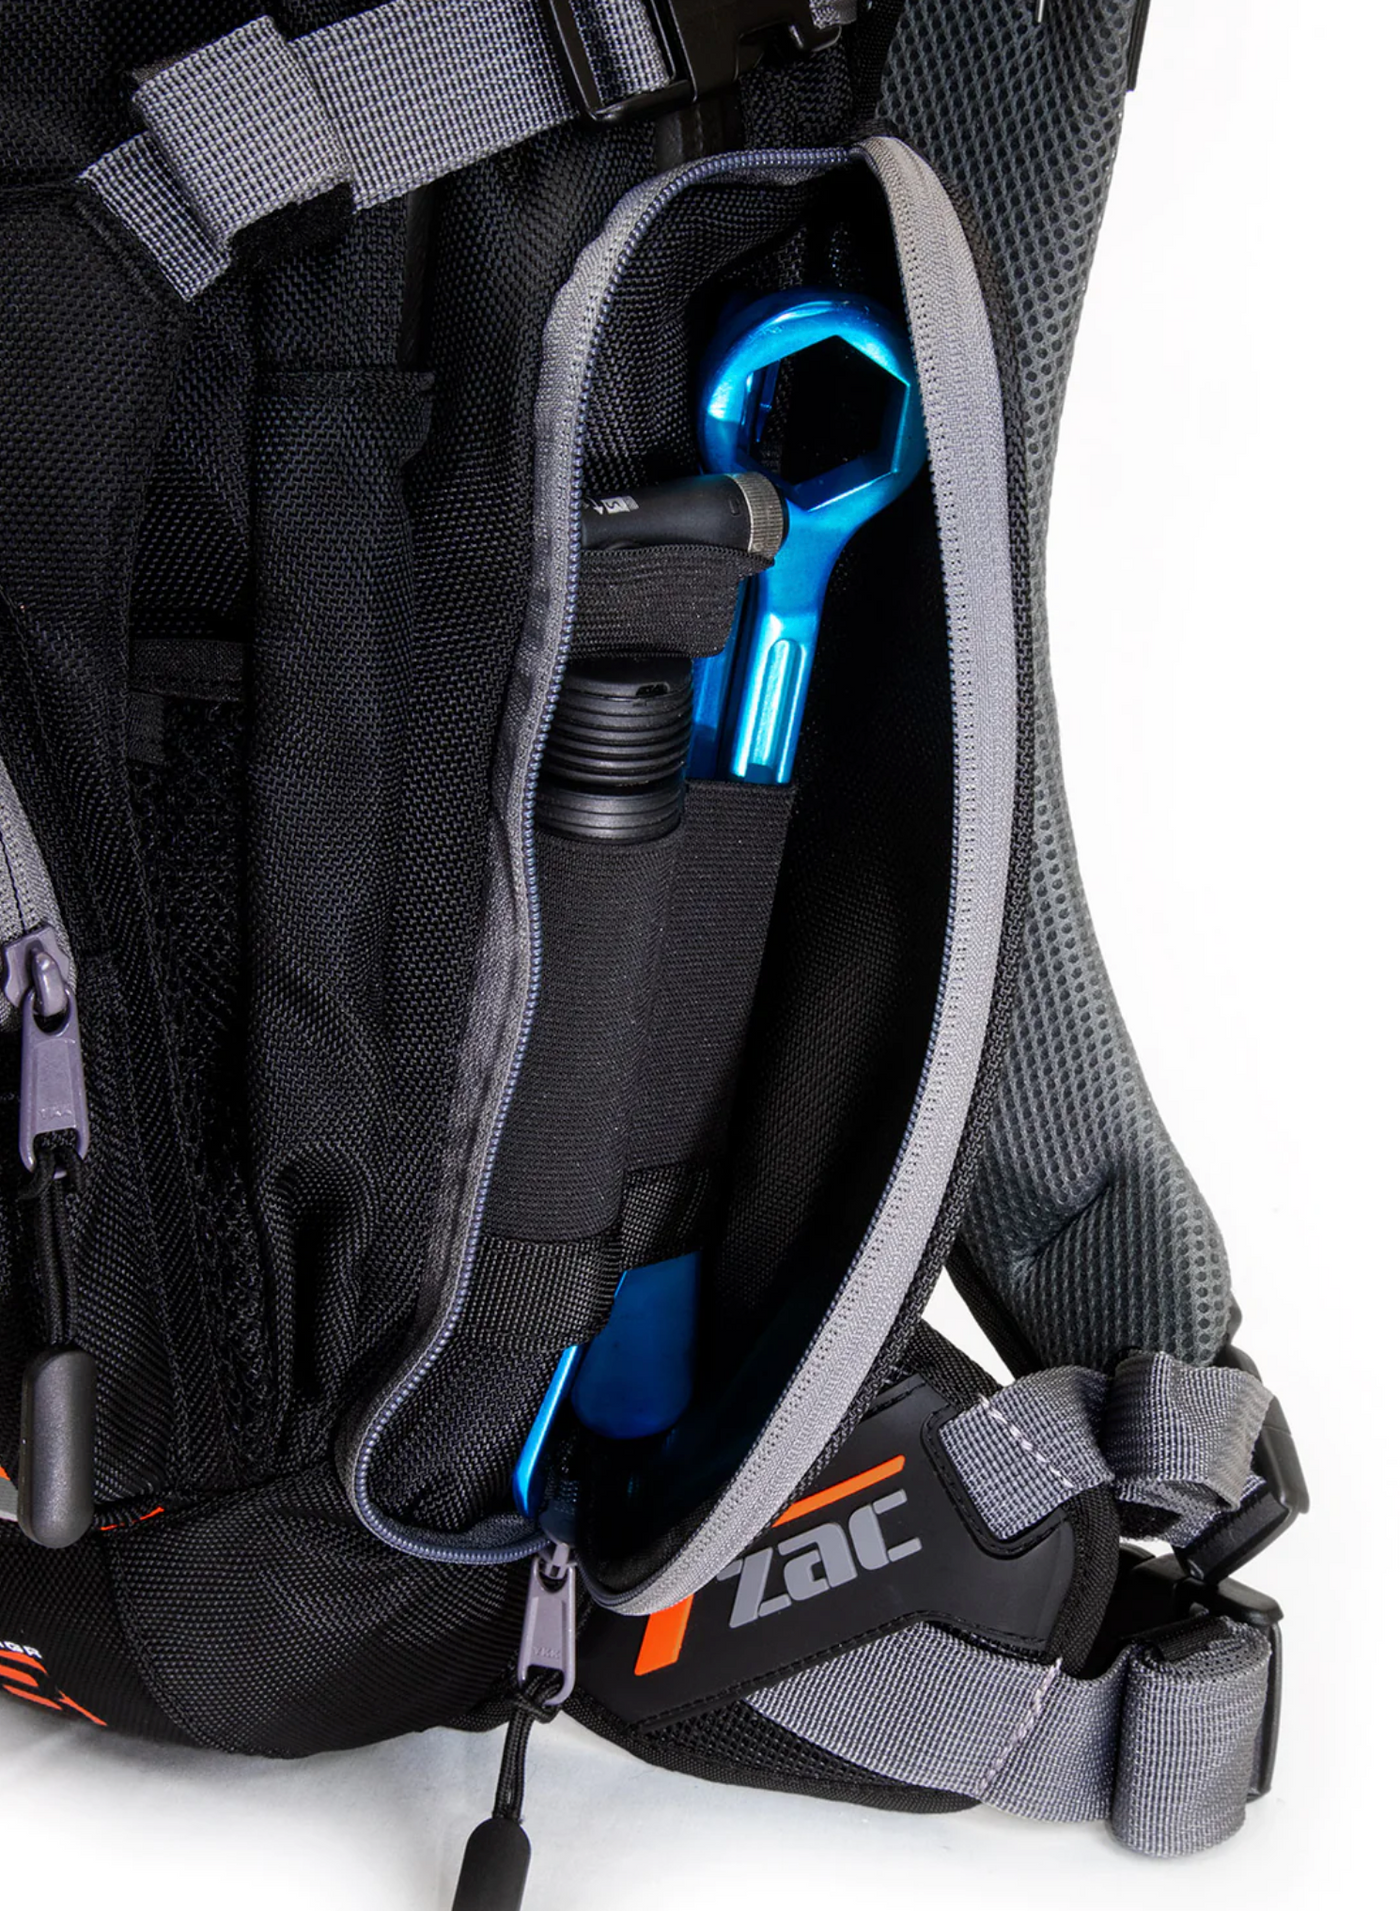 RECON S3 Backpack